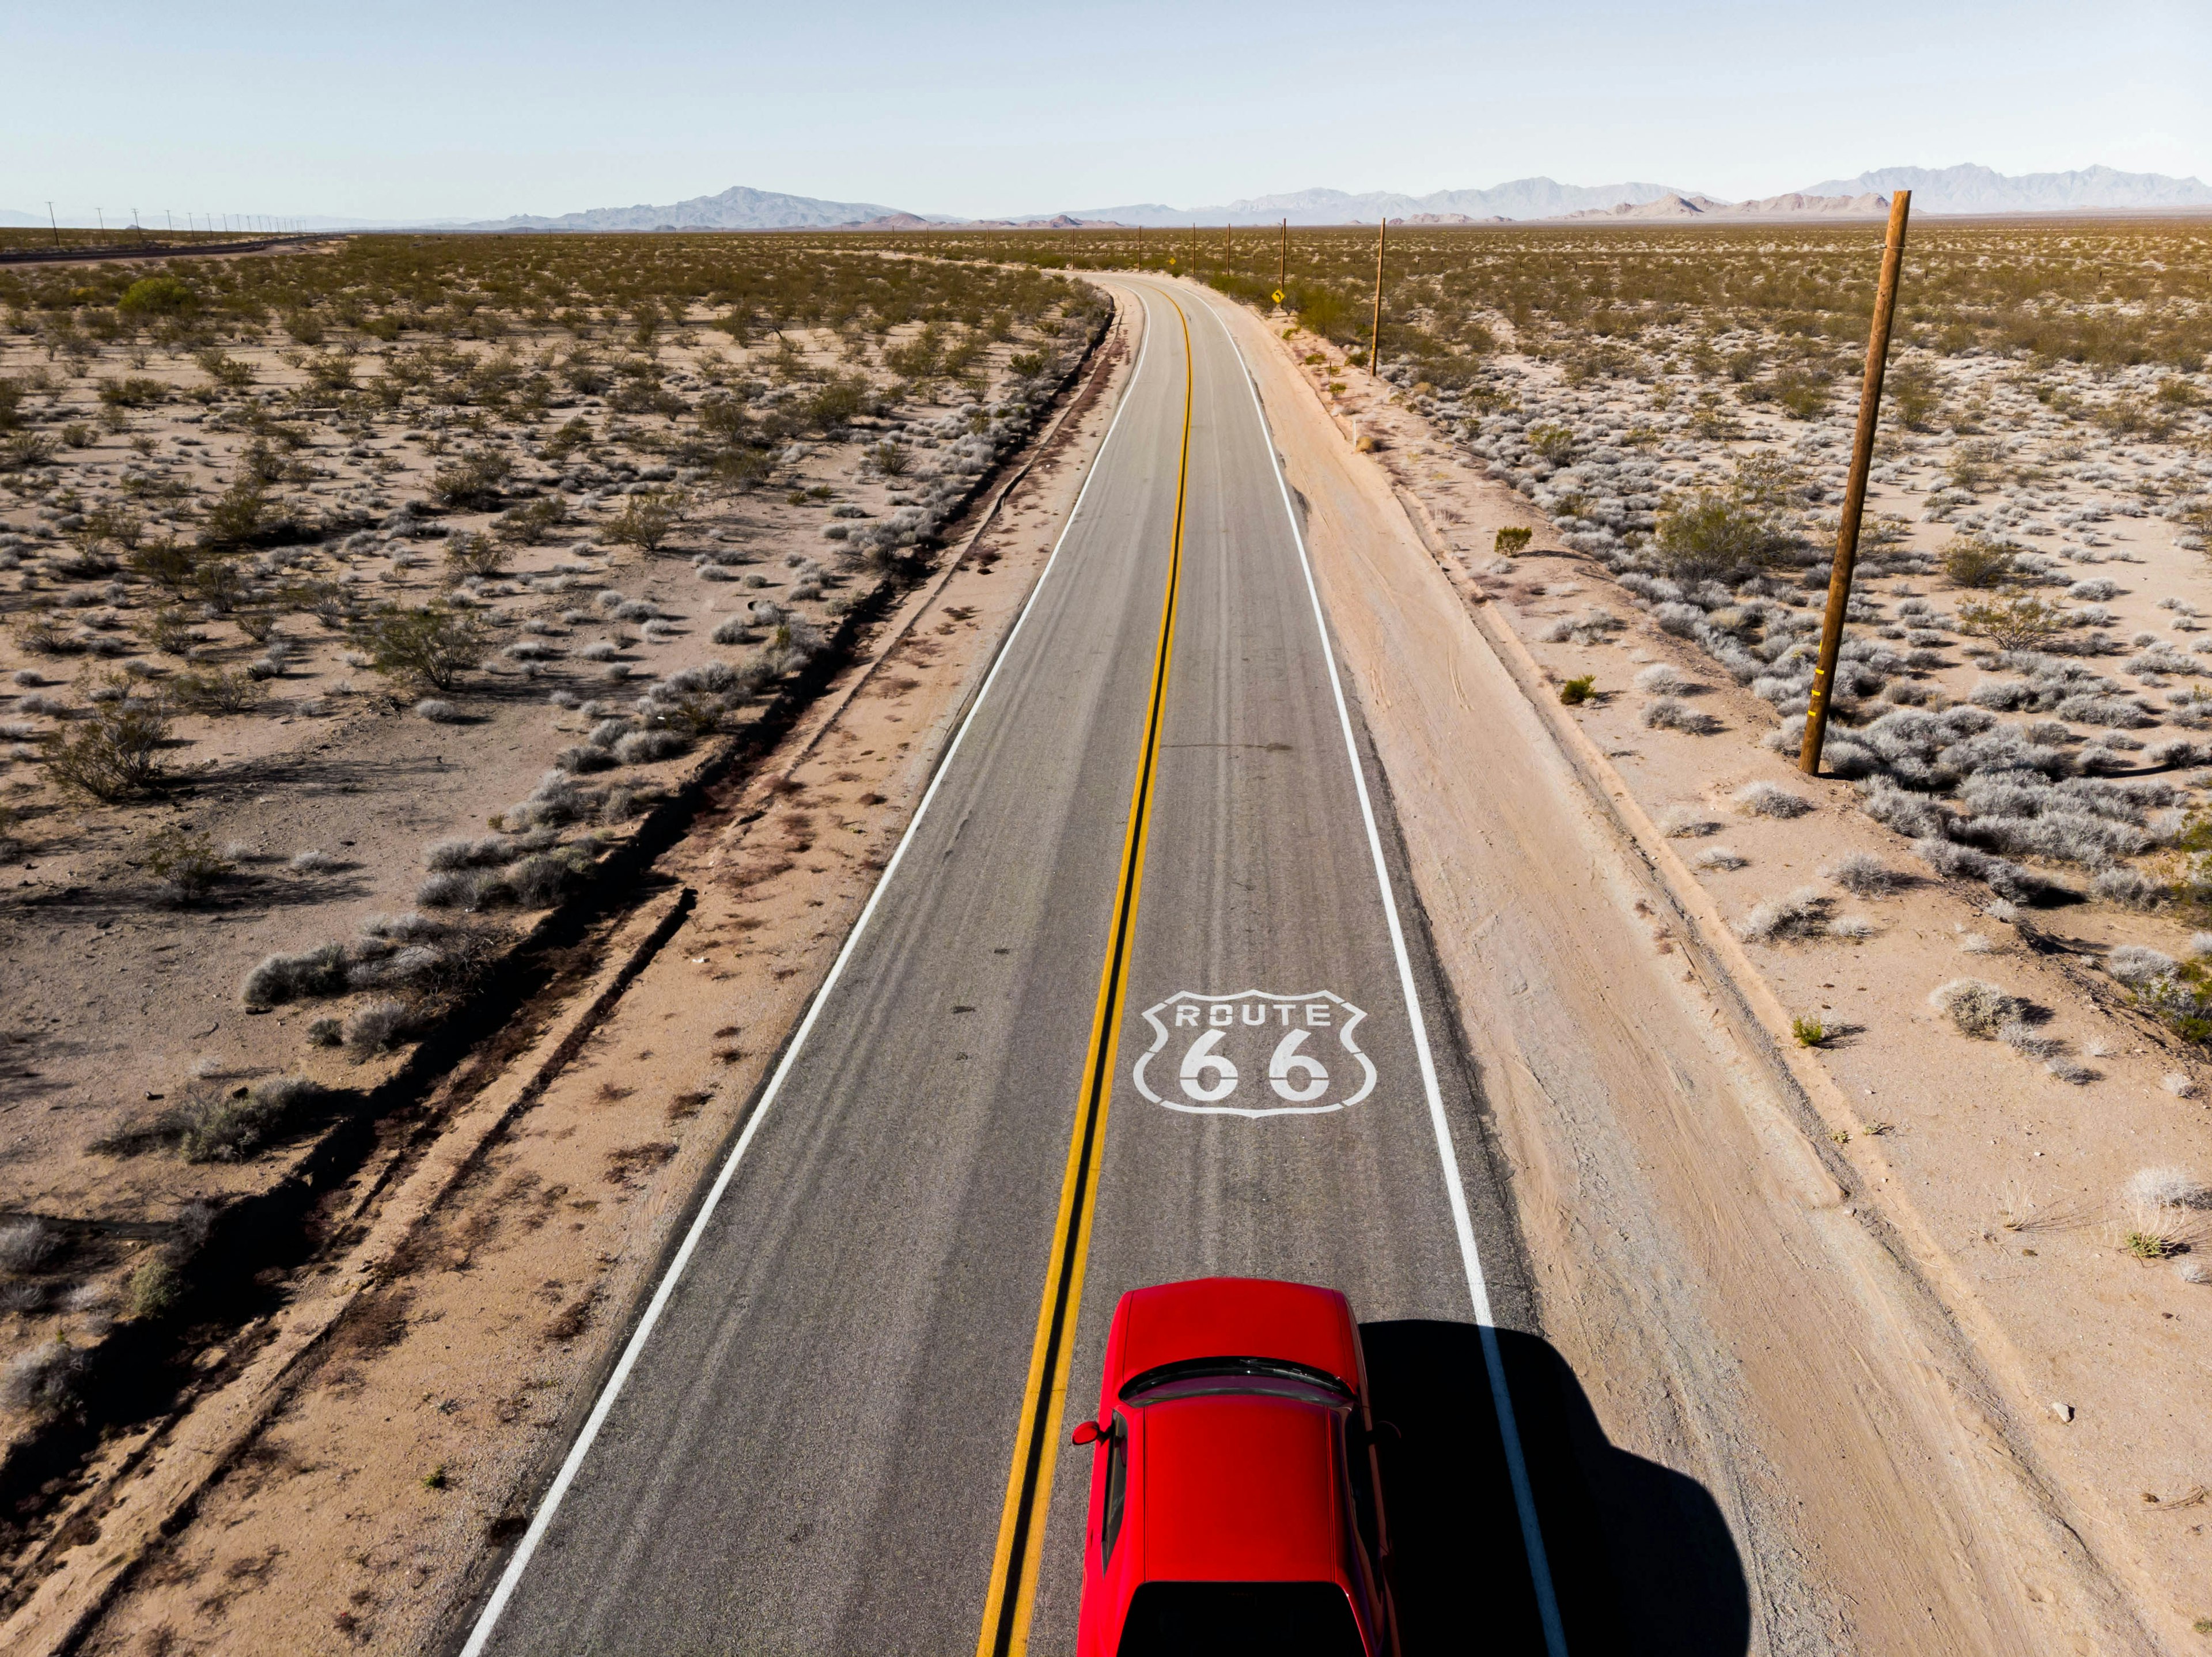 Aerial of a red car during a road trip on Route 66 in California.